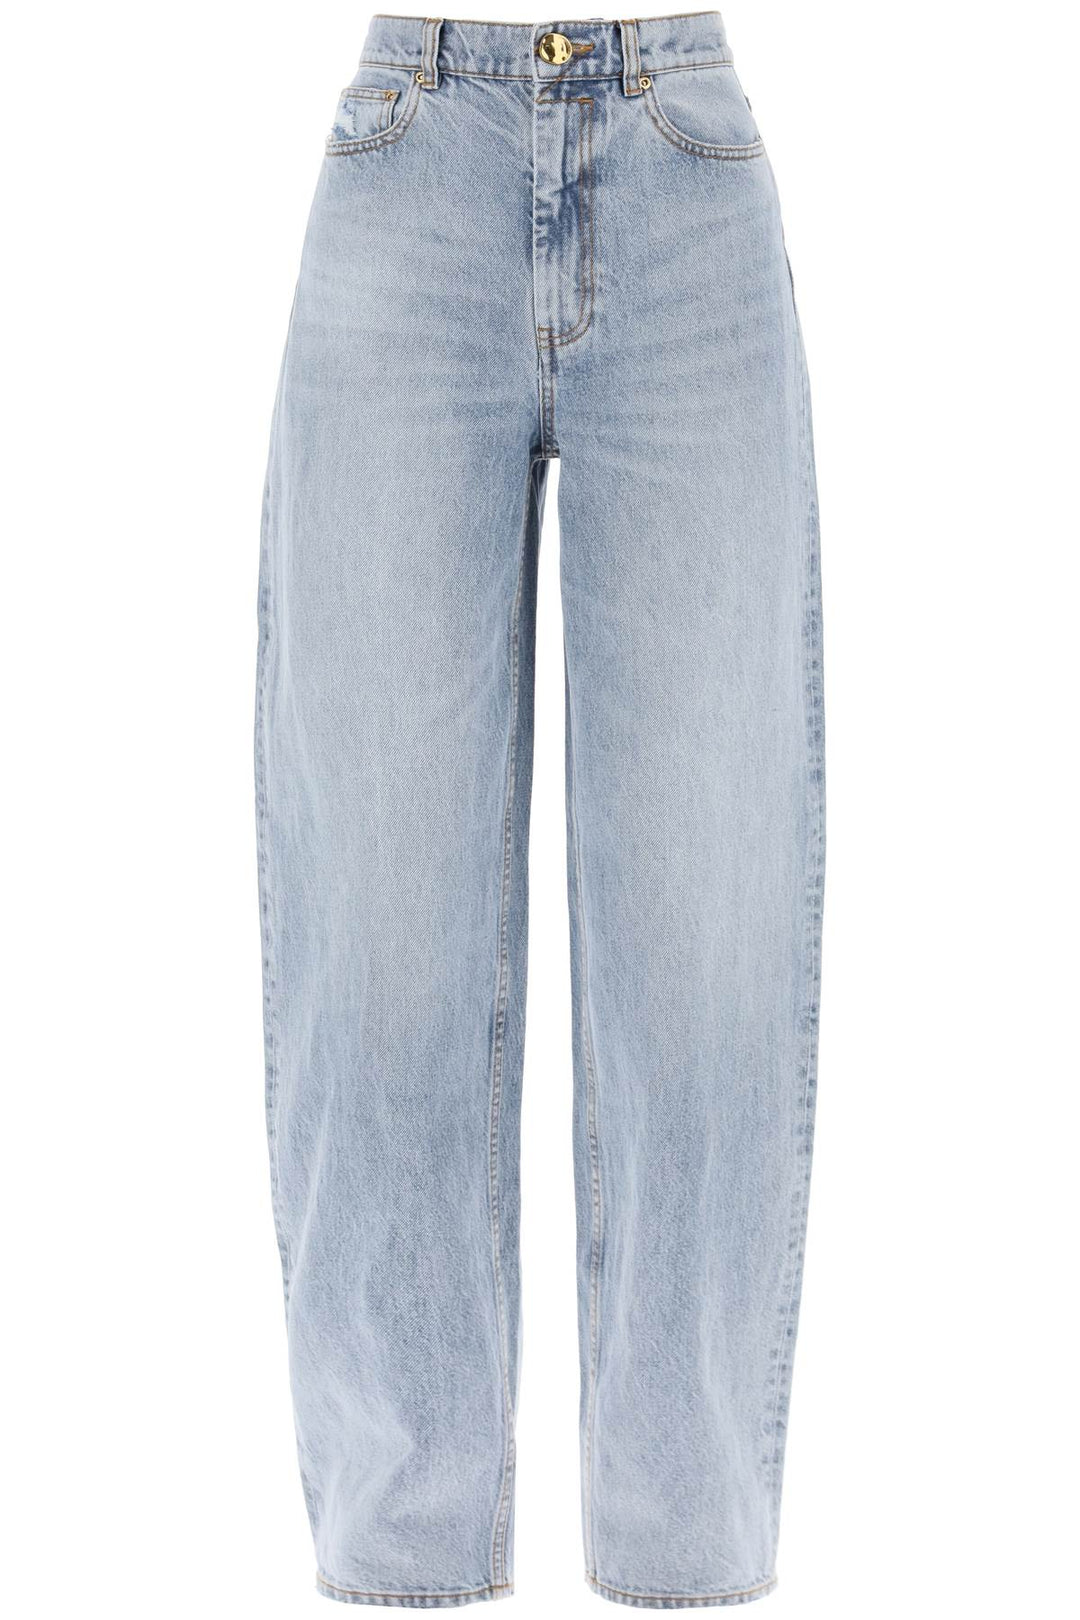 Zimmermann Replace With Double Quotecurved Leg Natural Jeans For   Celeste